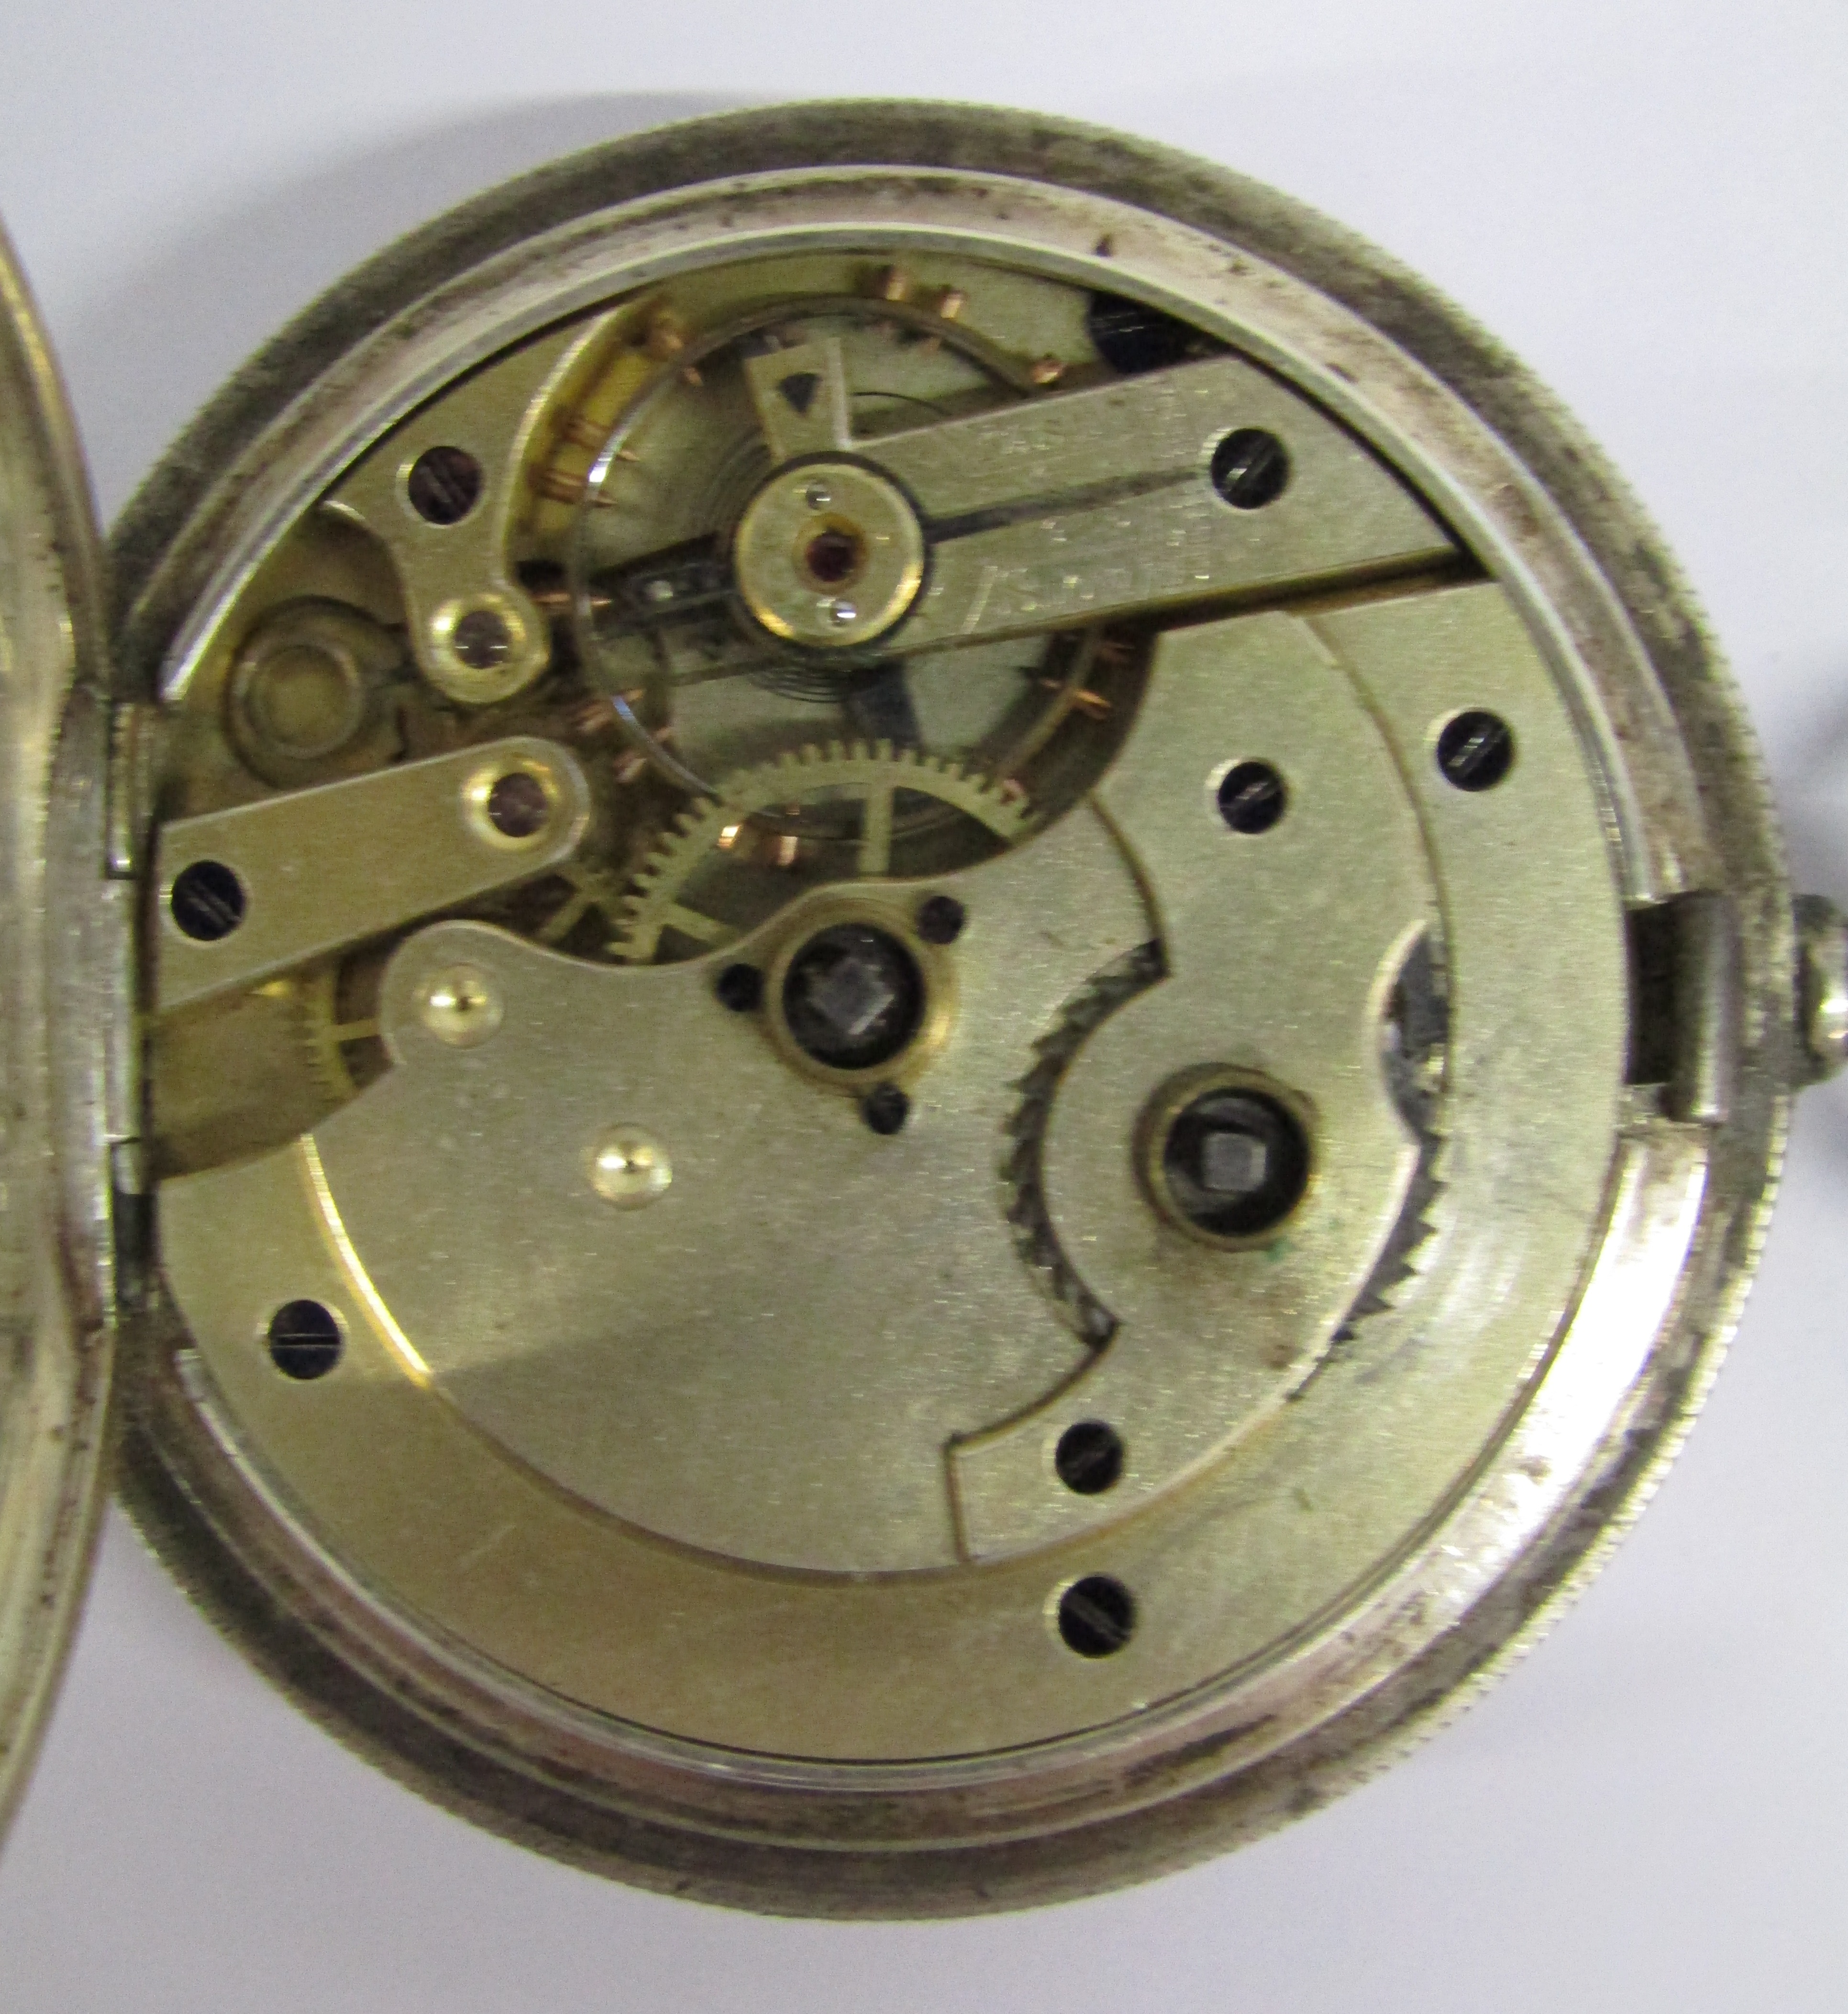 3 pocket watches - A.W.W. Co Waltham Mass gold plated, Thomas Russell & Son Liverpool gold plated - Image 18 of 18